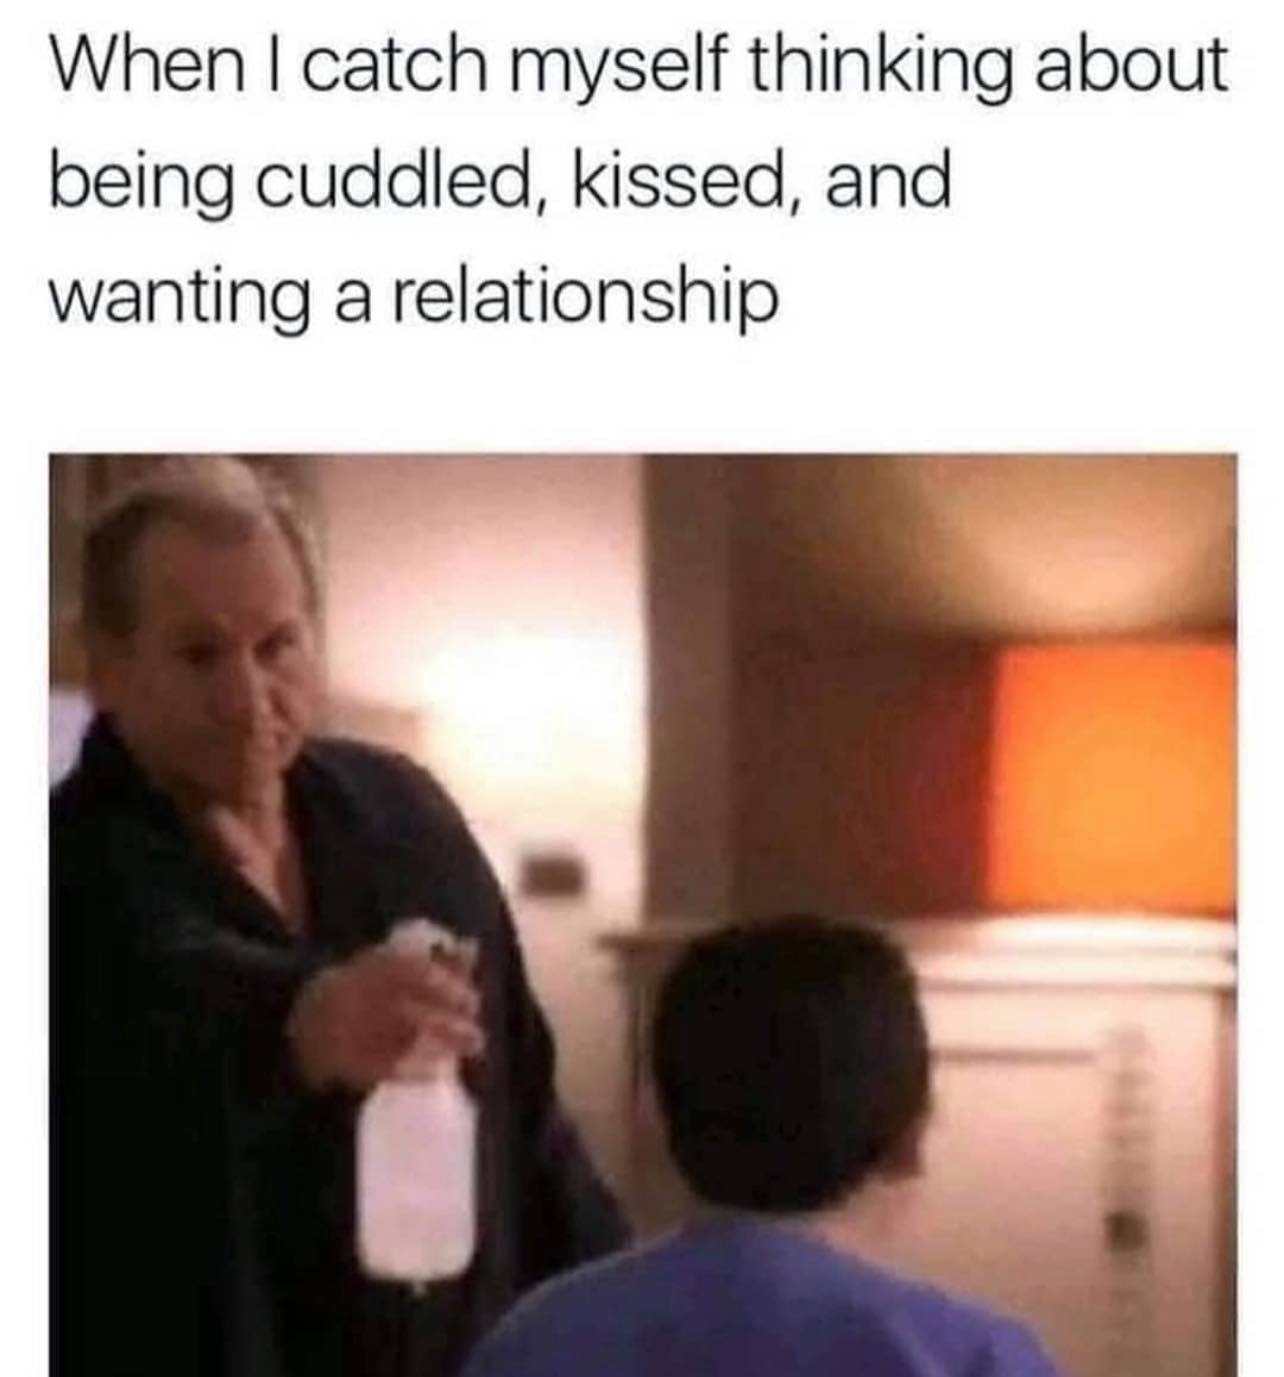 Single Life Memes - catch myself thinking about being cuddled - When I catch myself thinking about being cuddled, kissed, and wanting a relationship